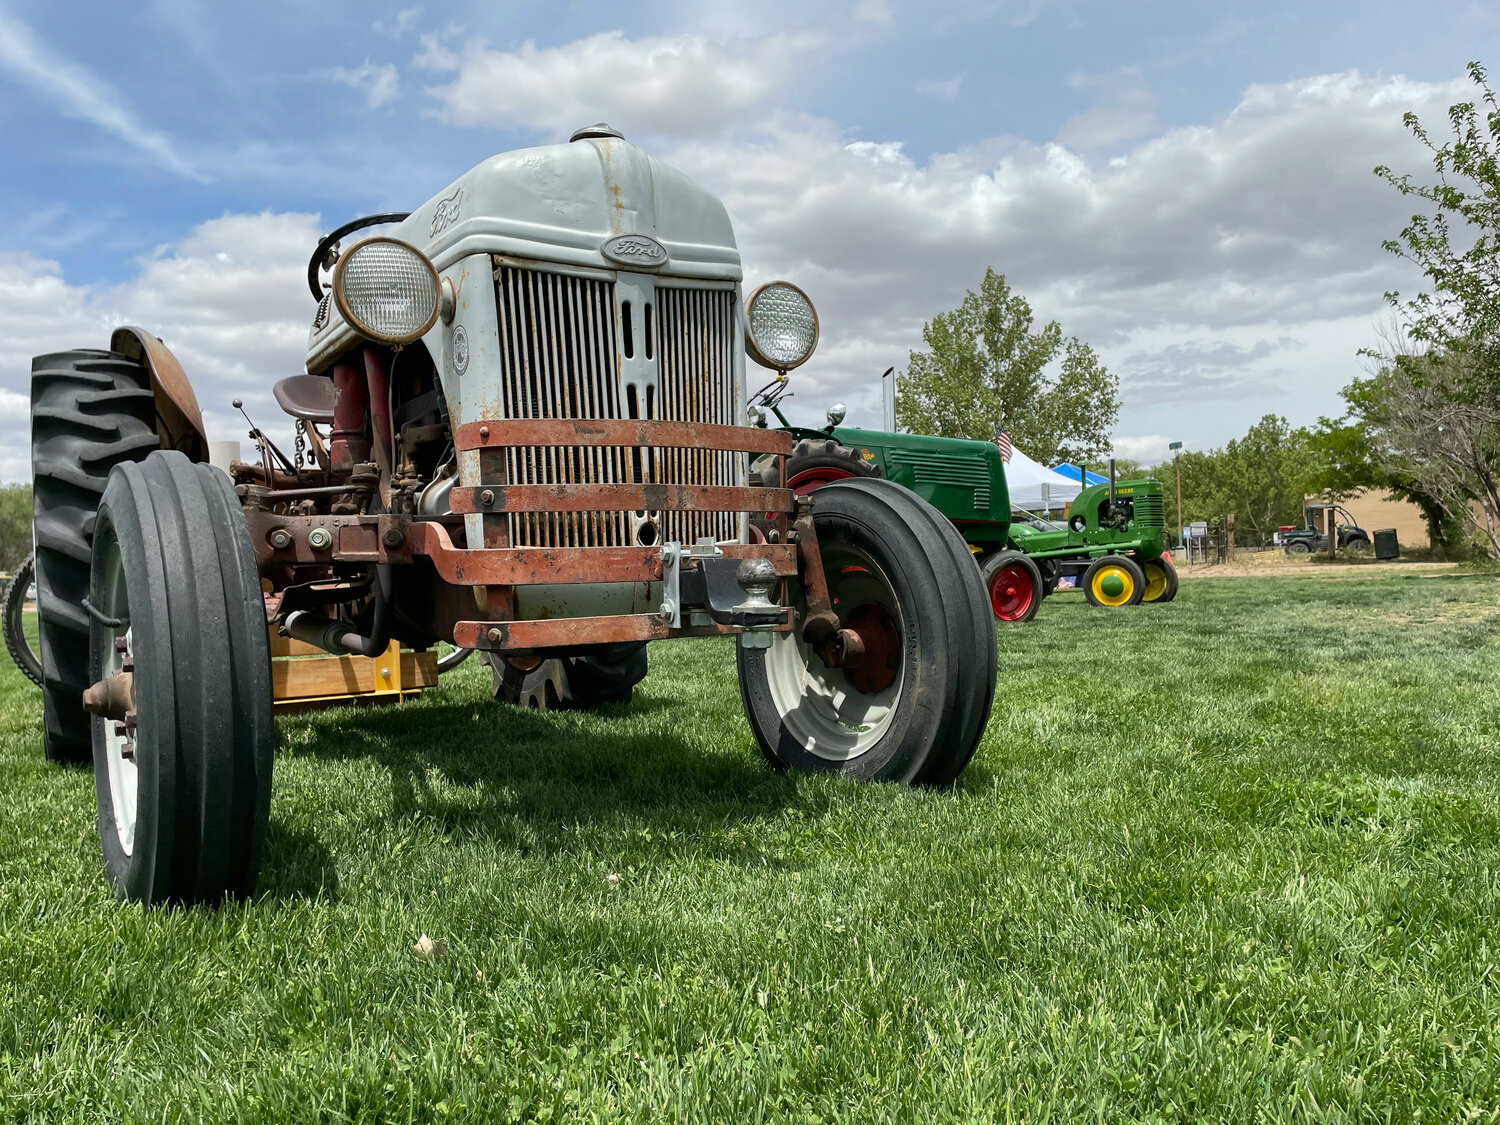 The Corrales Tractor Club will host its third annual Antique Tractor and Vintage Car Show June 3. (T.S. Last/Sandoval Signpost)